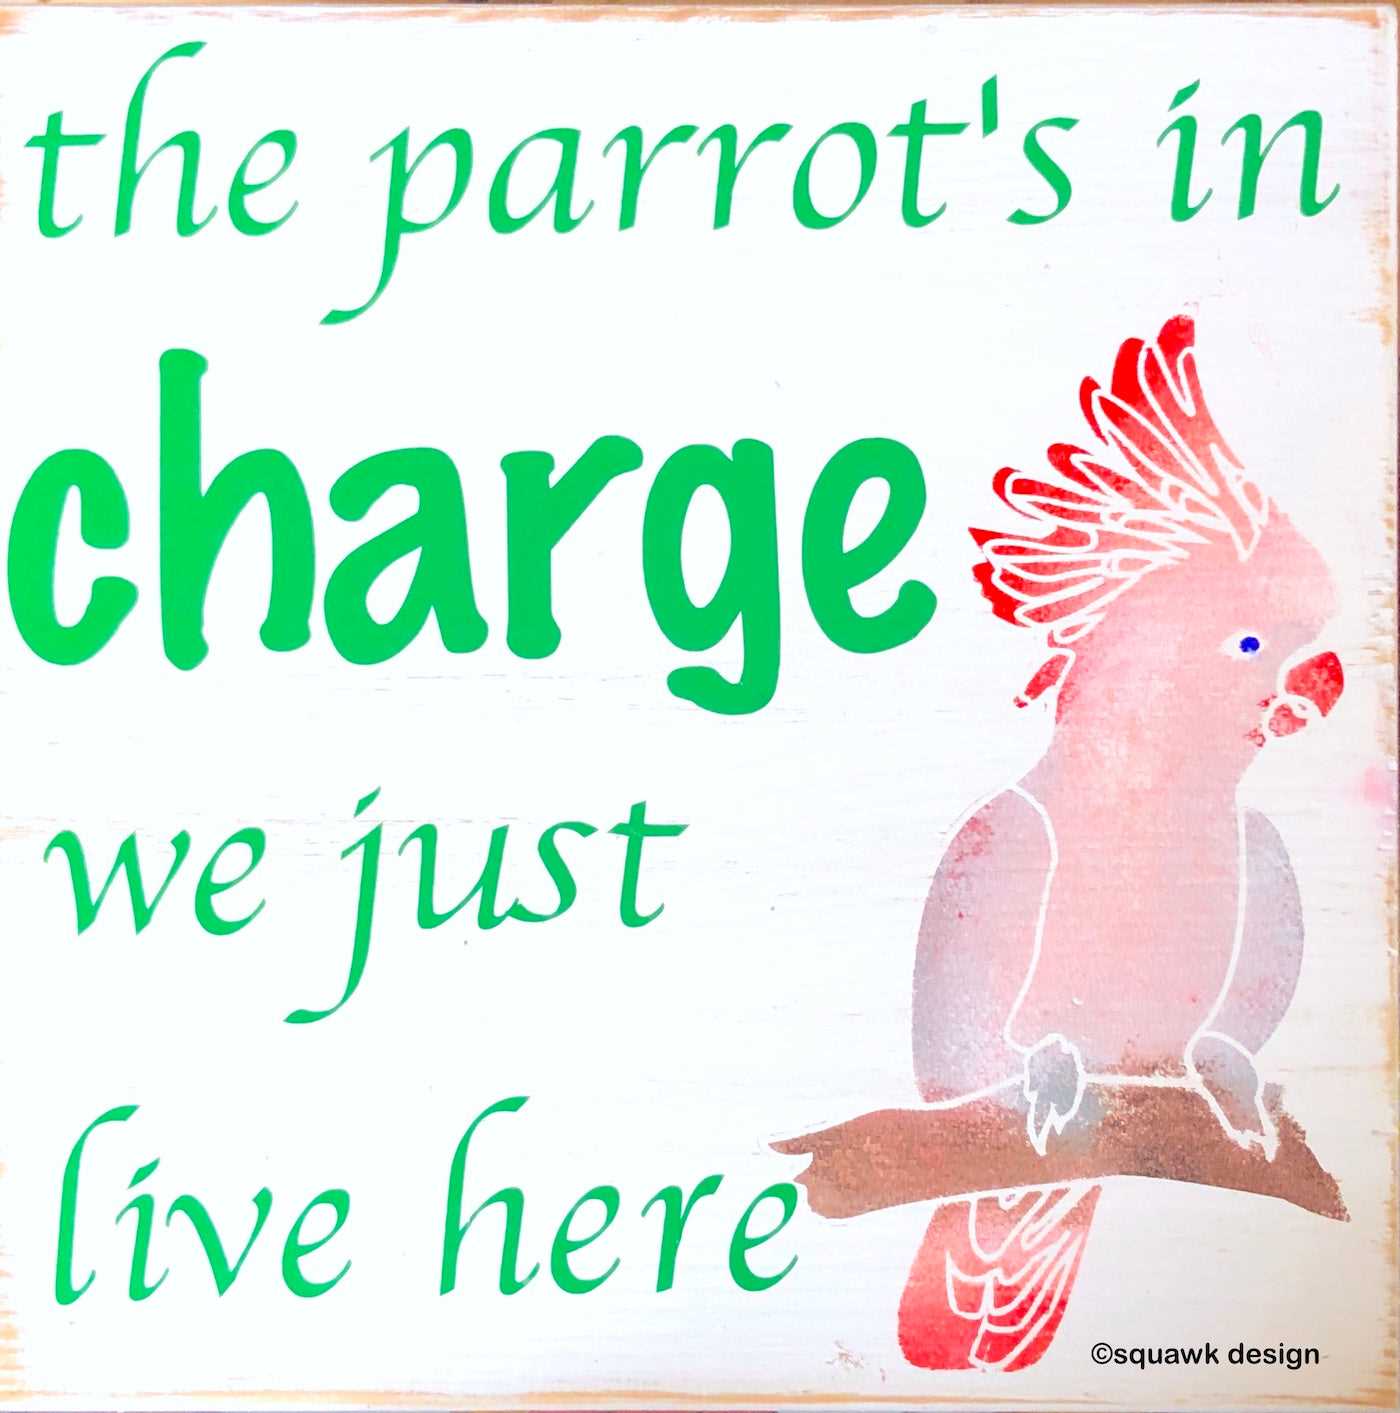 Parrots in charge, we just live here wood sign